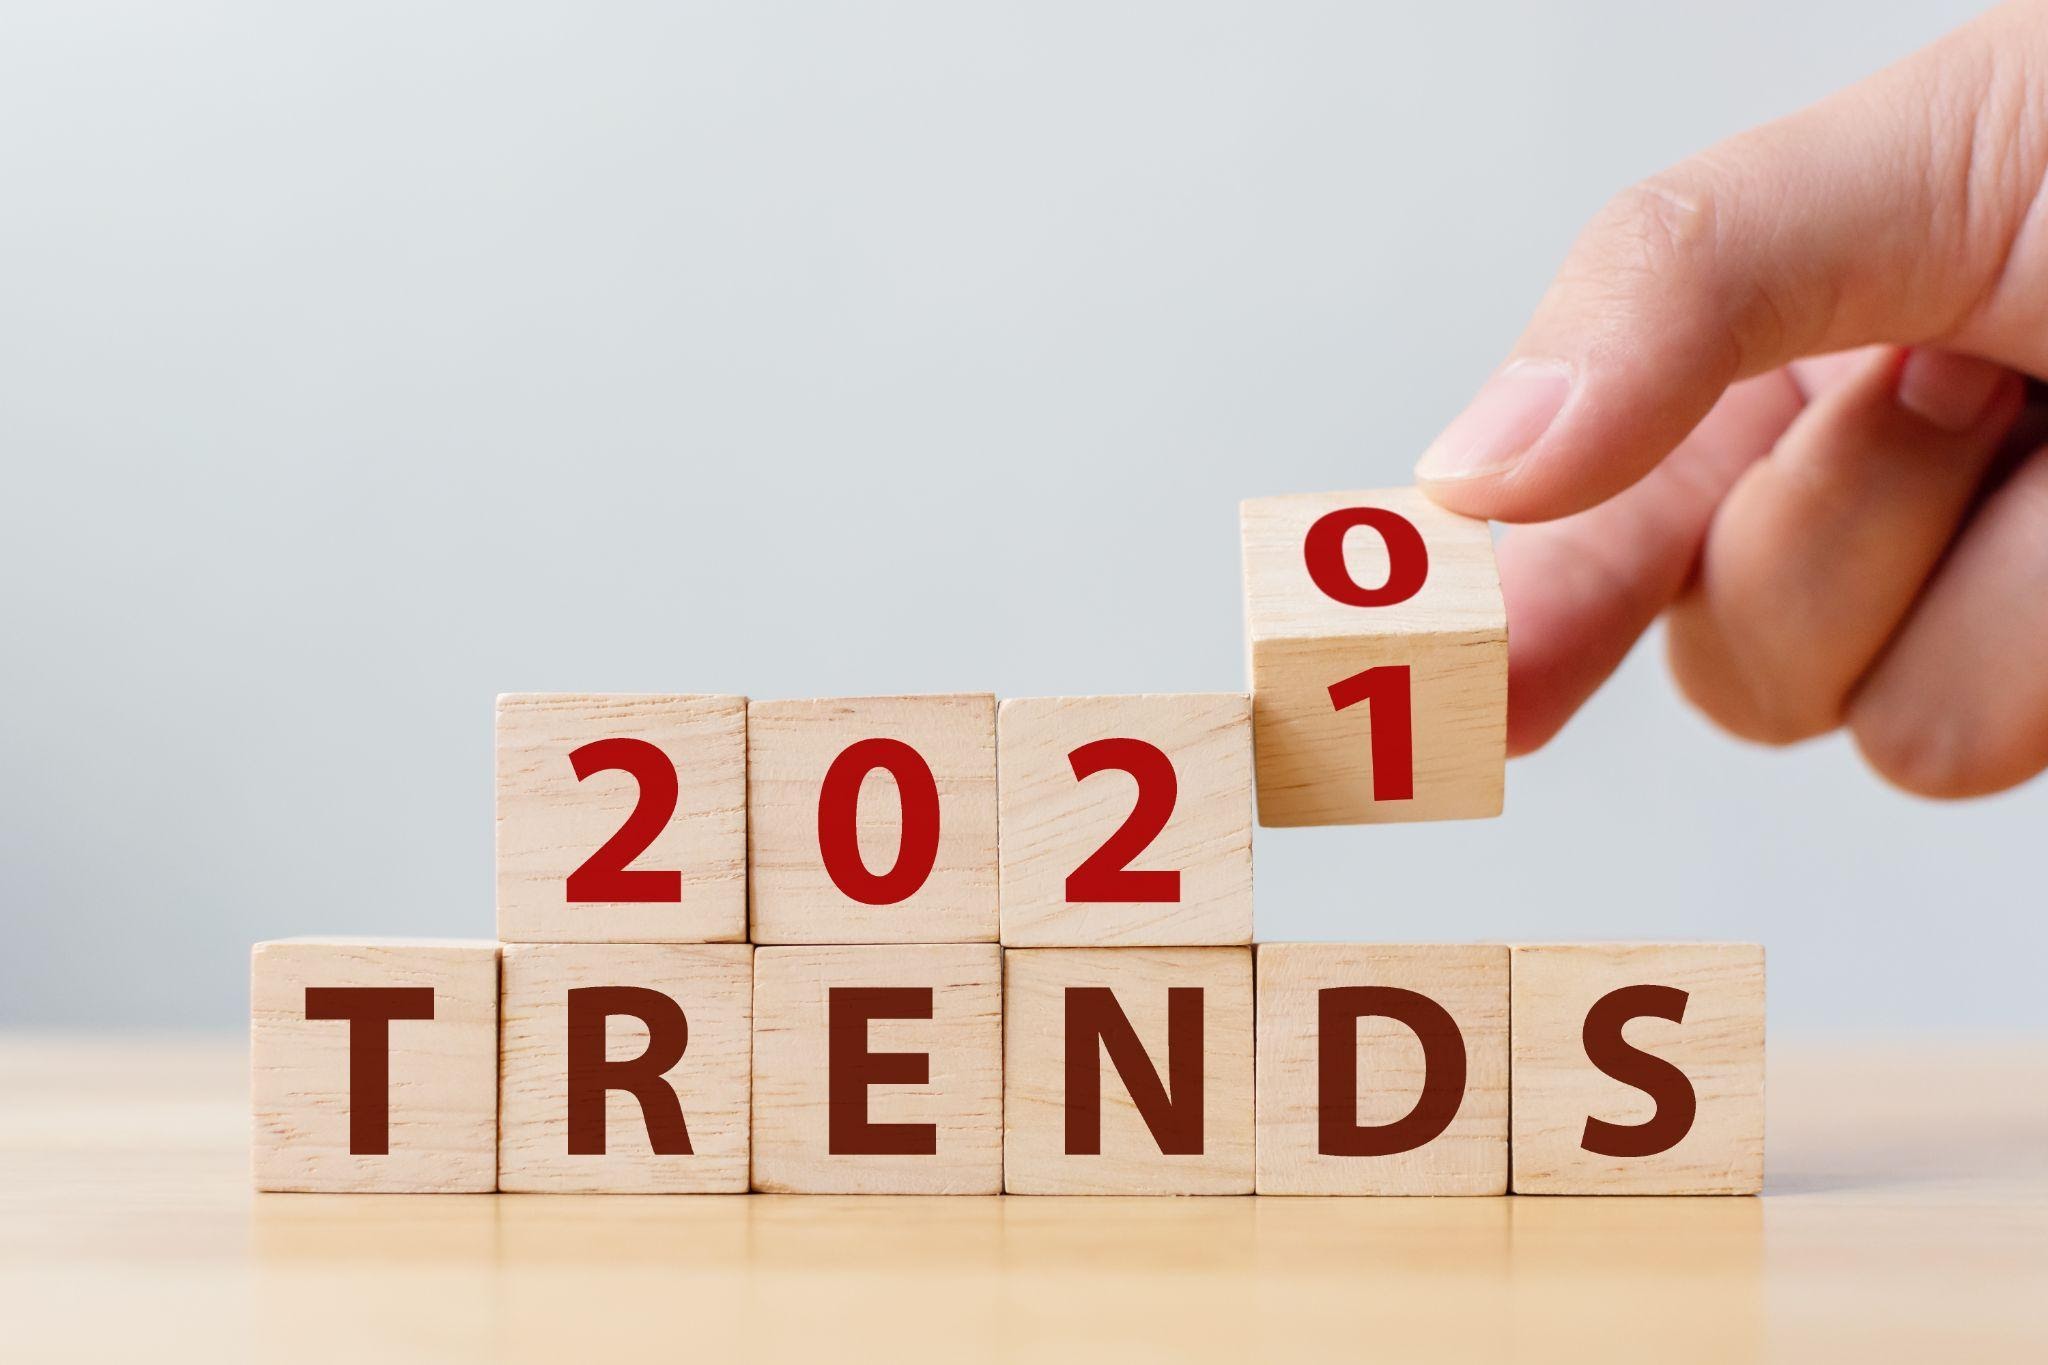 Wooden blocks that say 2021 in red and Trends in reddish brown